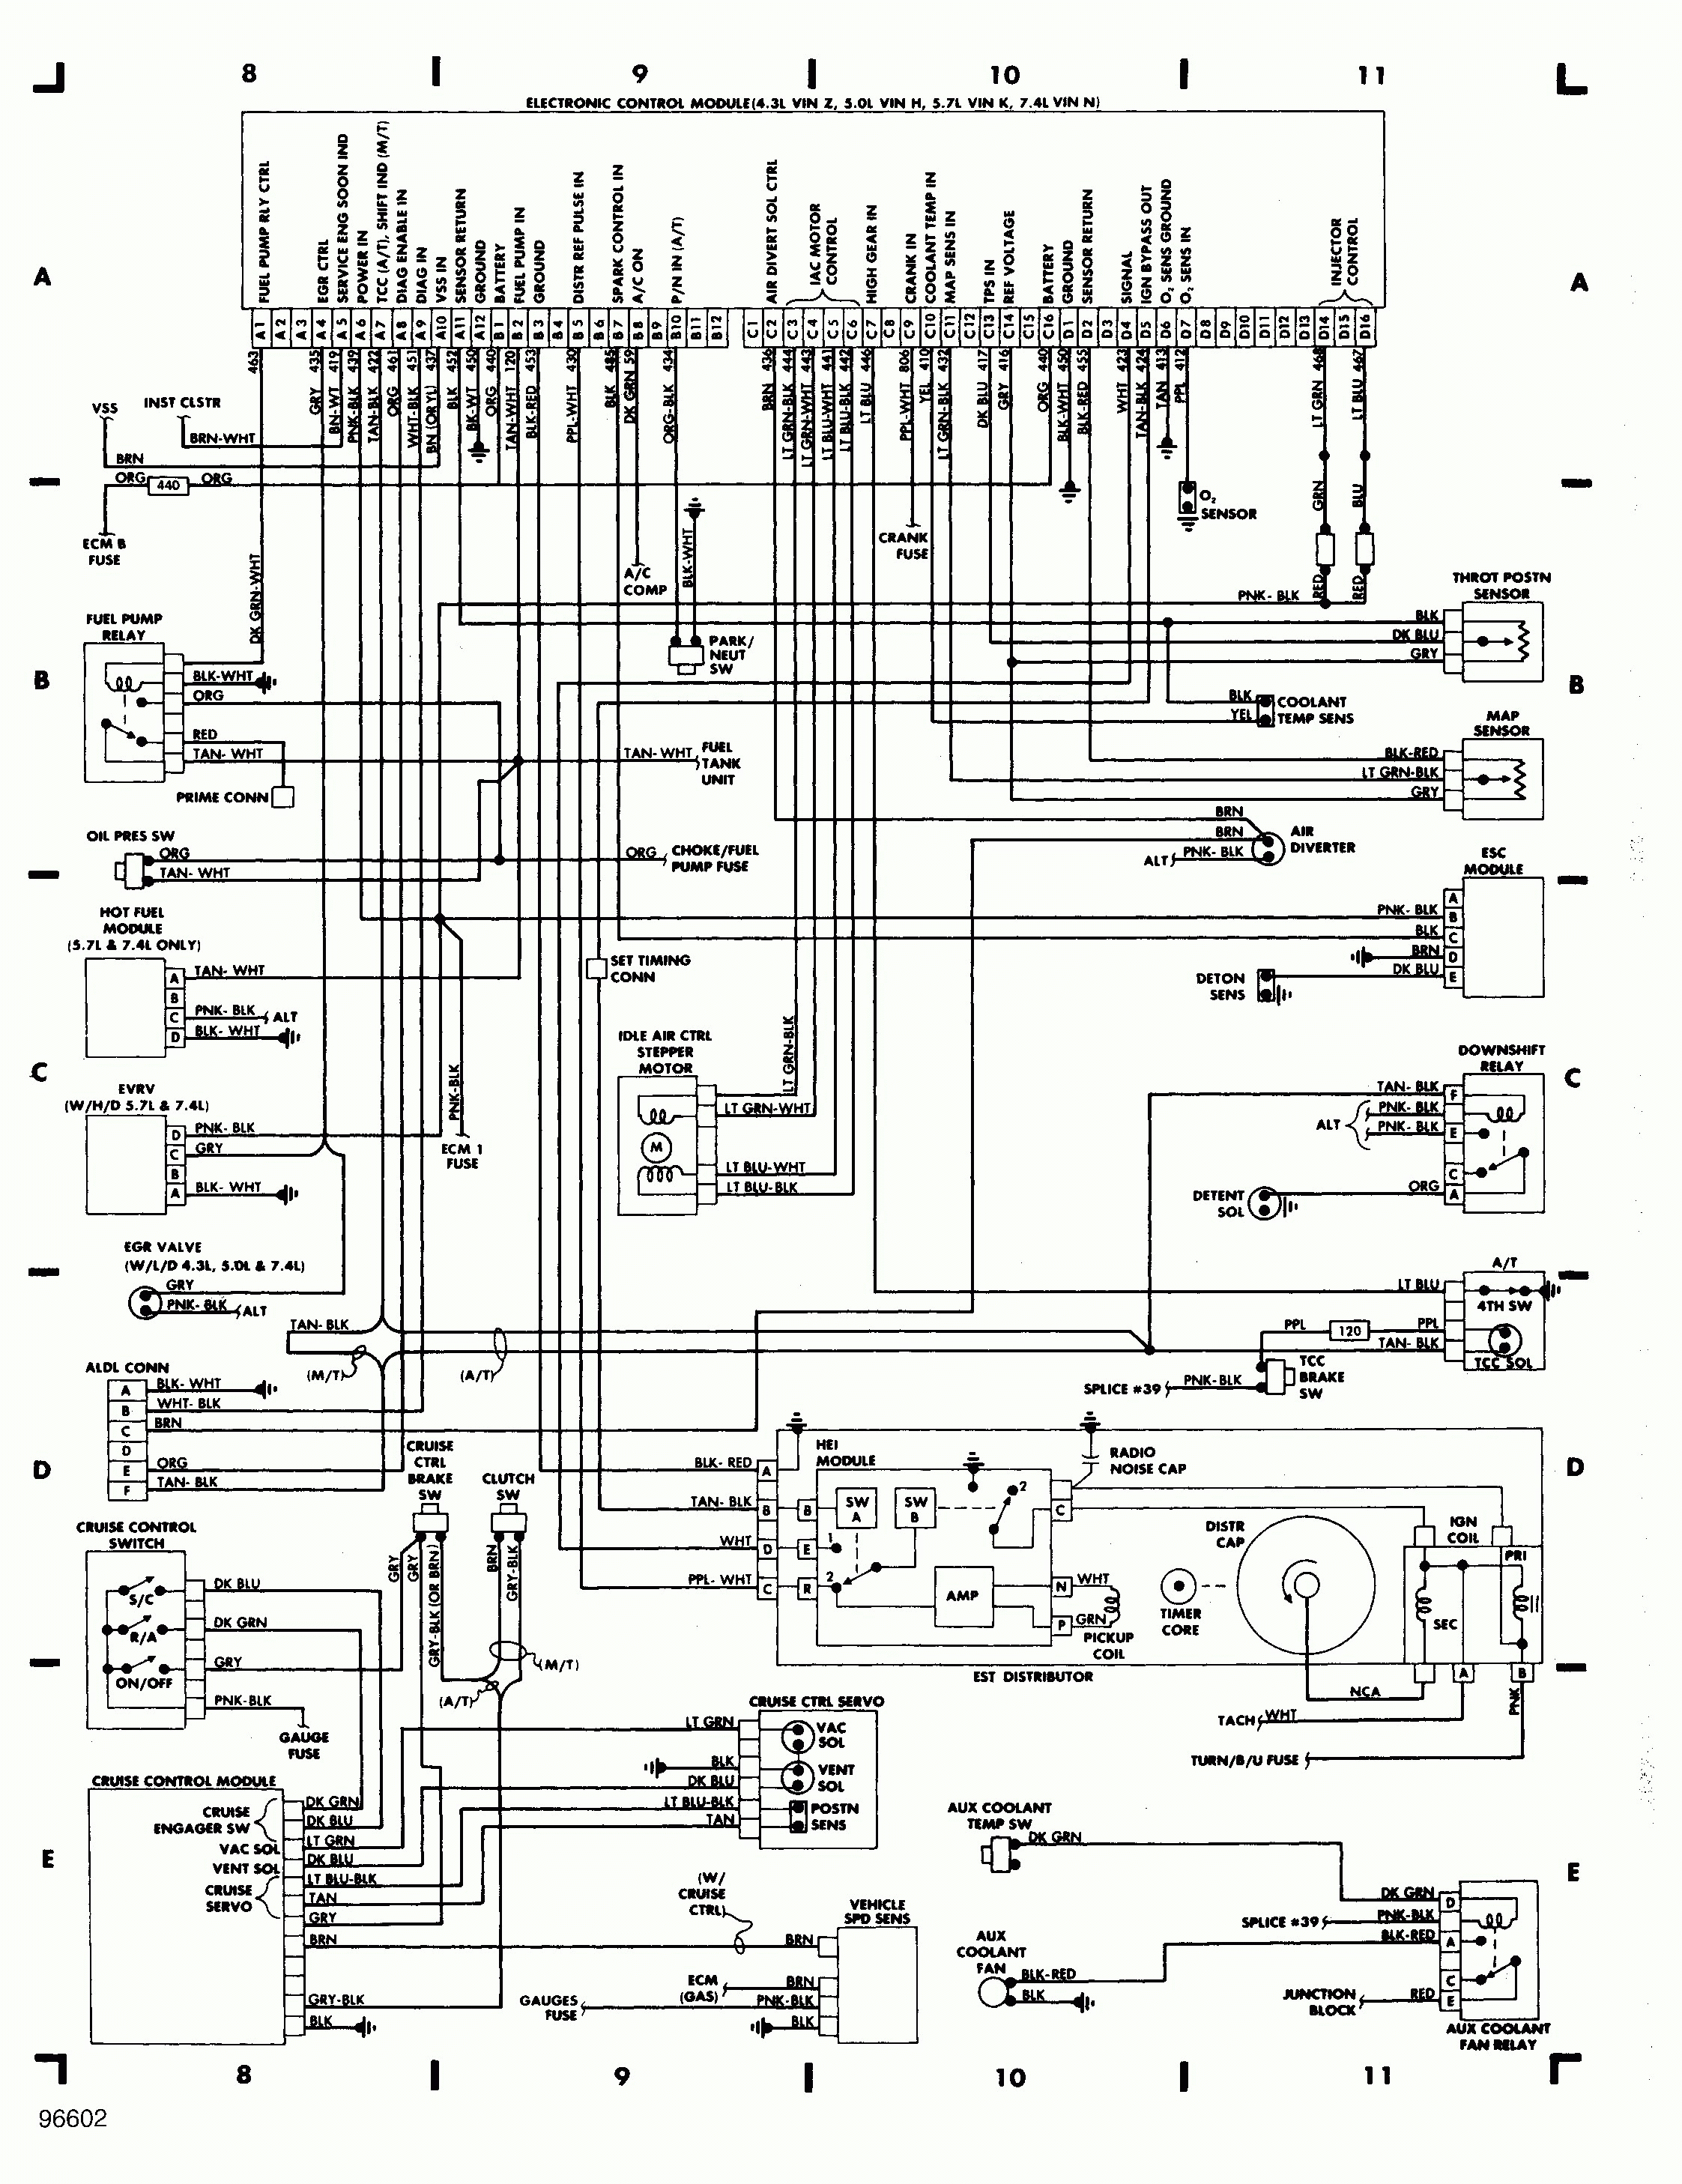 Howell Wiring Harness Diagram - Wiring Diagram Data - Tbi Wiring Harness Diagram